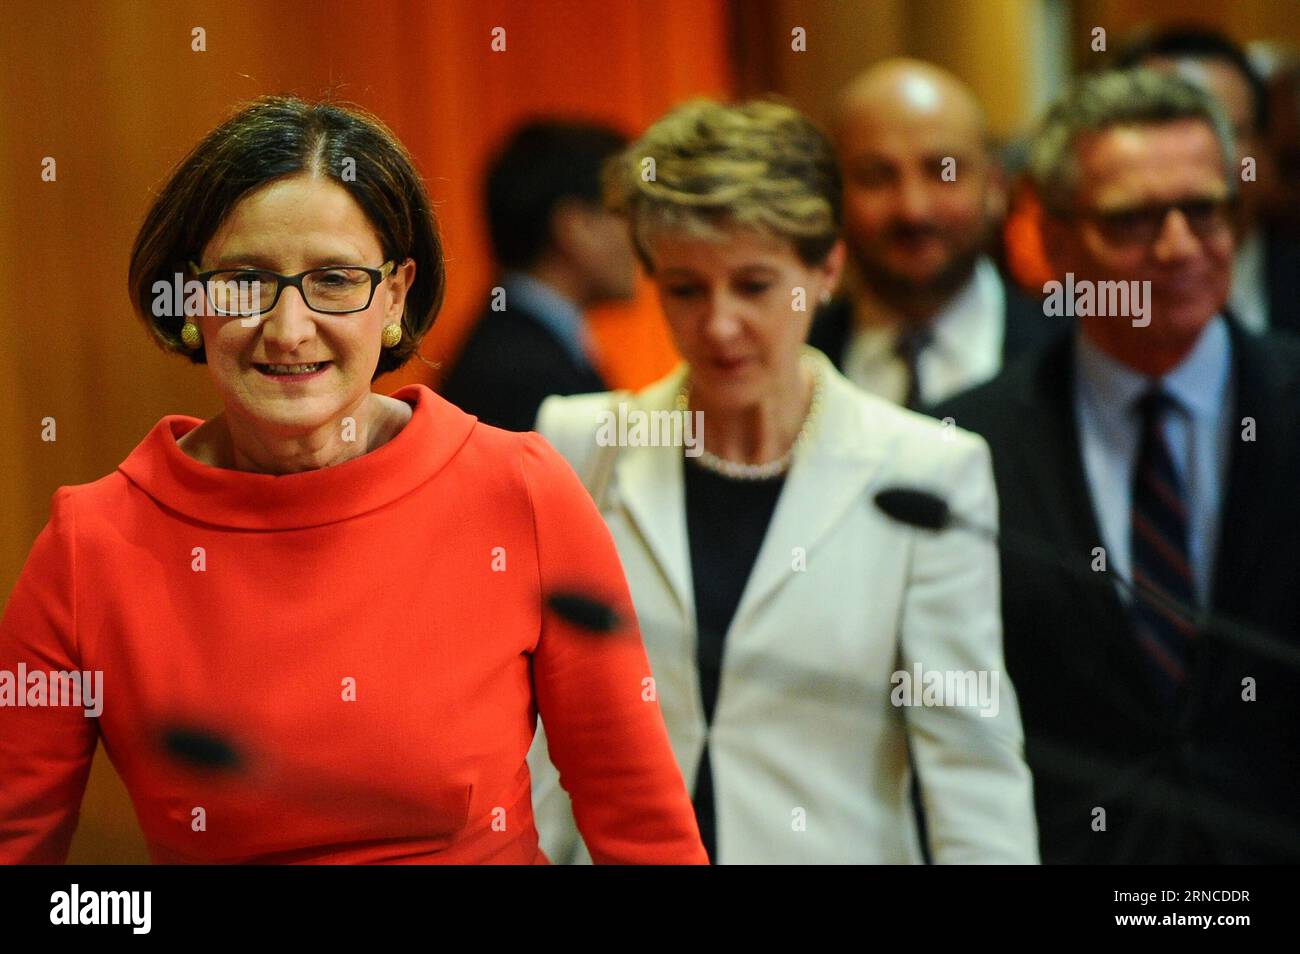 (160406) -- VIENNA, April 5, 2016 -- (L-R) Austrian Interior Minister Johanna Mikl-Leitner, Swiss Justice Minister Simonetta Sommaruga and German Interior Minister Thomas de Maiziere arrive for a press conference in Vienna, Austria, April 5, 2016. Government officials of Austria, Germany, Liechtenstein, Luxembourg and Switzerland held a meeting in Vienna on Tuesday to discuss issues related to refugees. ) (cl) AUSTRIA-VIENNA-MEETING QianxYi PUBLICATIONxNOTxINxCHN   Vienna April 5 2016 l r Austrian Interior Ministers Johanna Mikl Leitner Swiss Justice Ministers Simonetta Sommaruga and German In Stock Photo